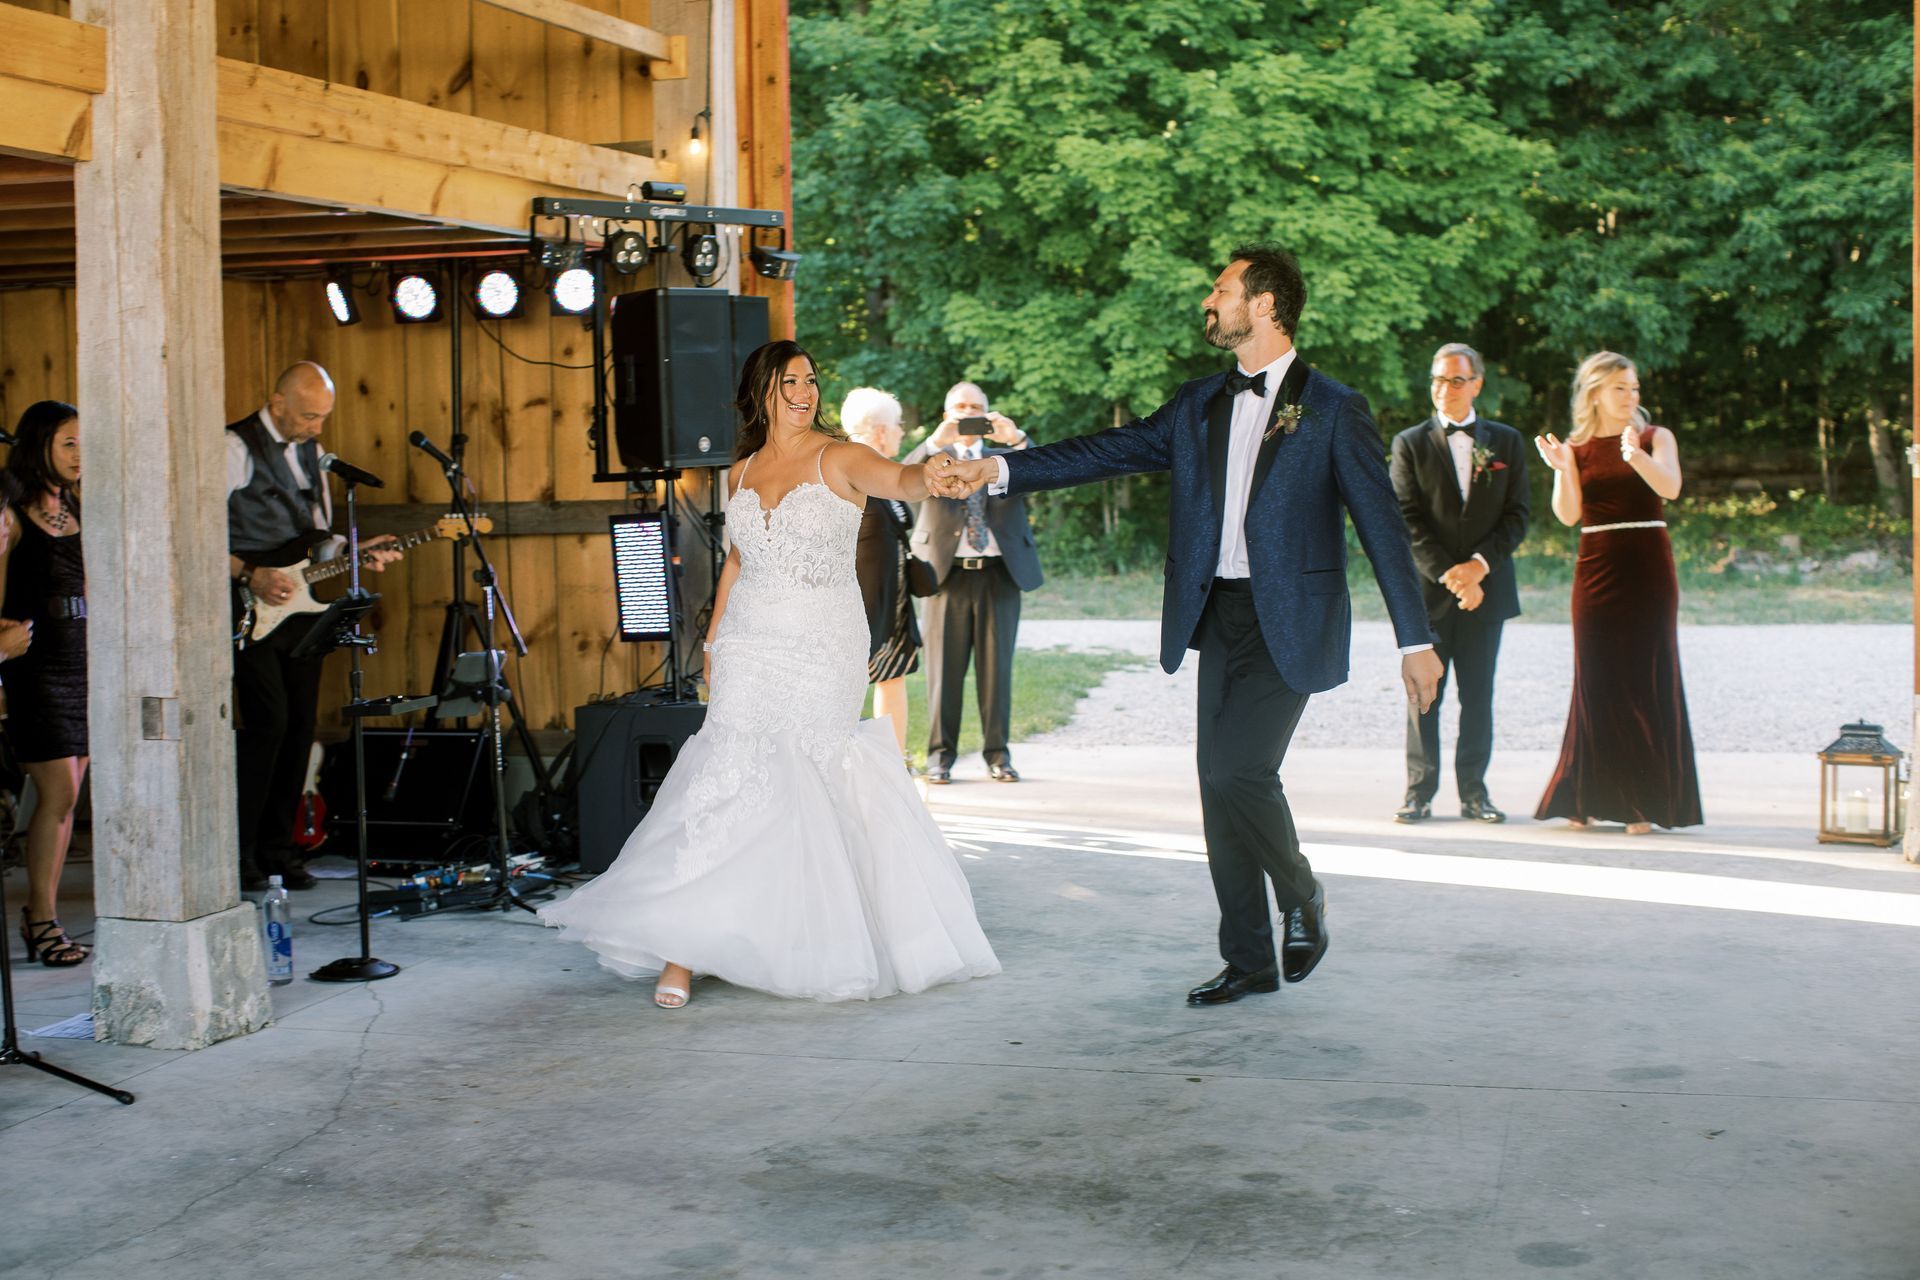 a bride and groom are dancing at their wedding reception in front of a band .